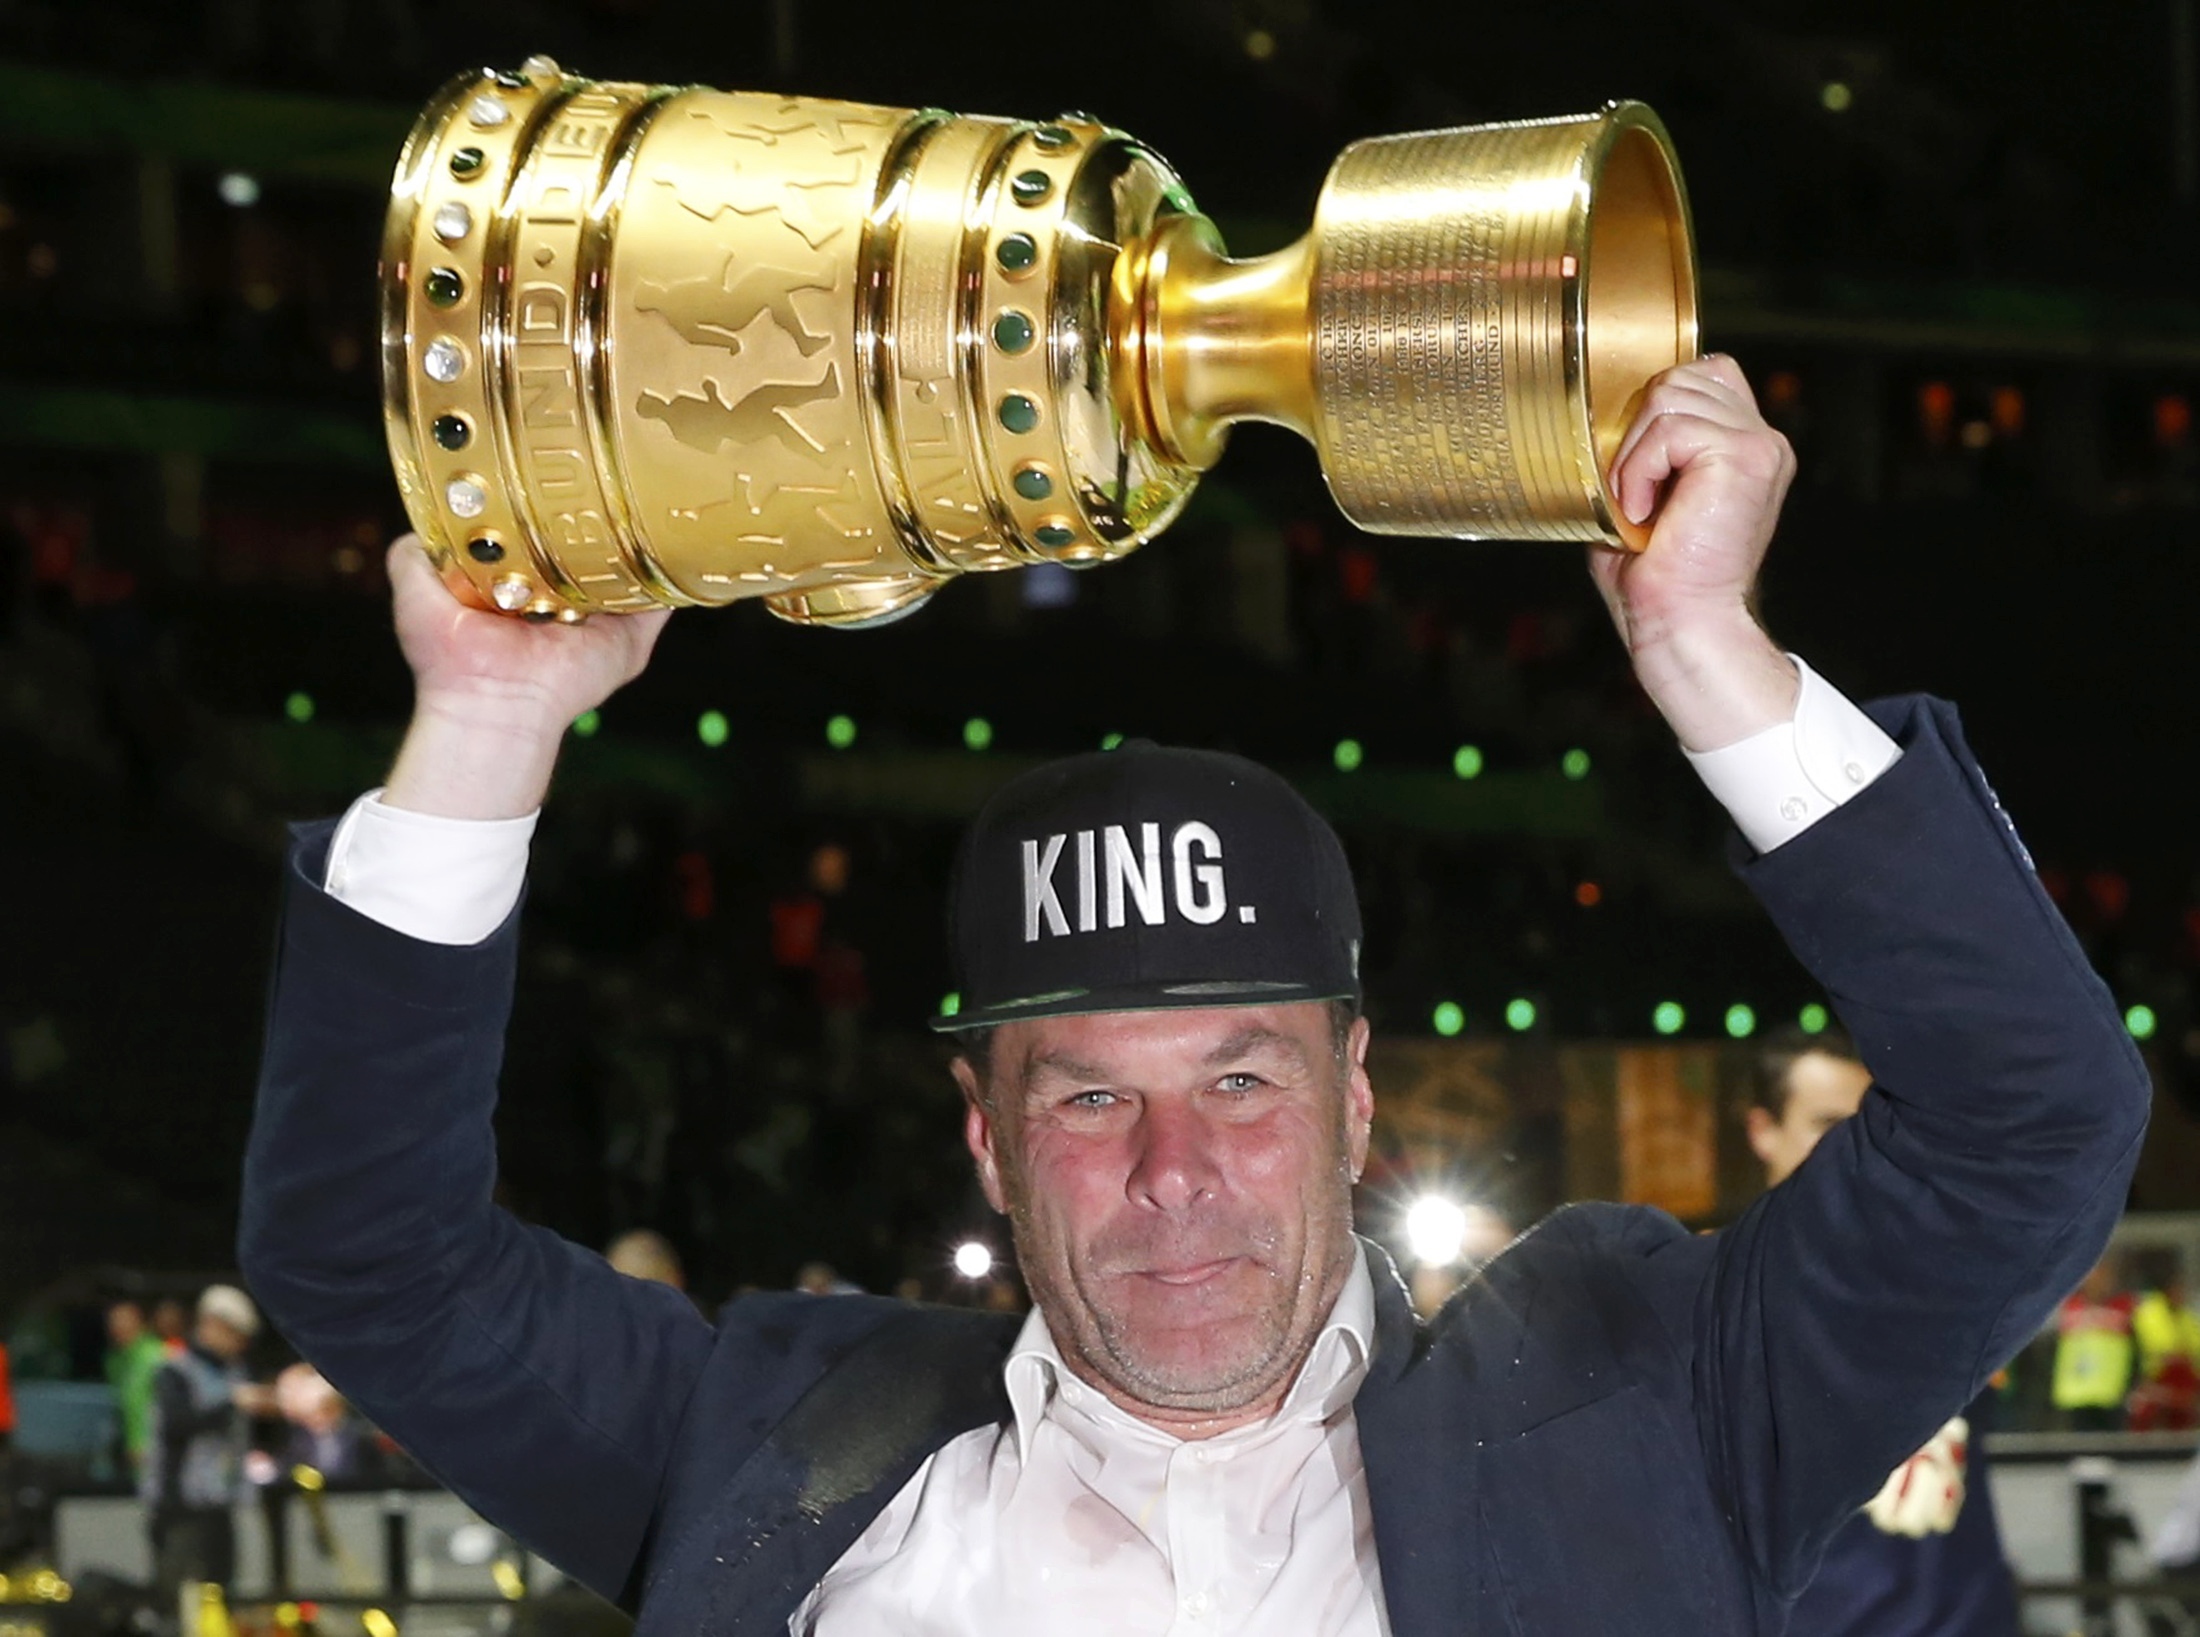 VfL Wolfsburg's coach Dieter Hecking celebrates with the trophy after their German Cup (DFB Pokal) final soccer match against Borussia Dortmund in Berlin, Germany, May 30, 2015. REUTERS/Fabrizio Bensch DFB RULES PROHIBIT USE IN MMS SERVICES VIA HANDHELD DEVICES UNTIL TWO HOURS AFTER A MATCH AND ANY USAGE ON INTERNET OR ONLINE MEDIA SIMULATING VIDEO FOOTAGE DURING THE MATCH.